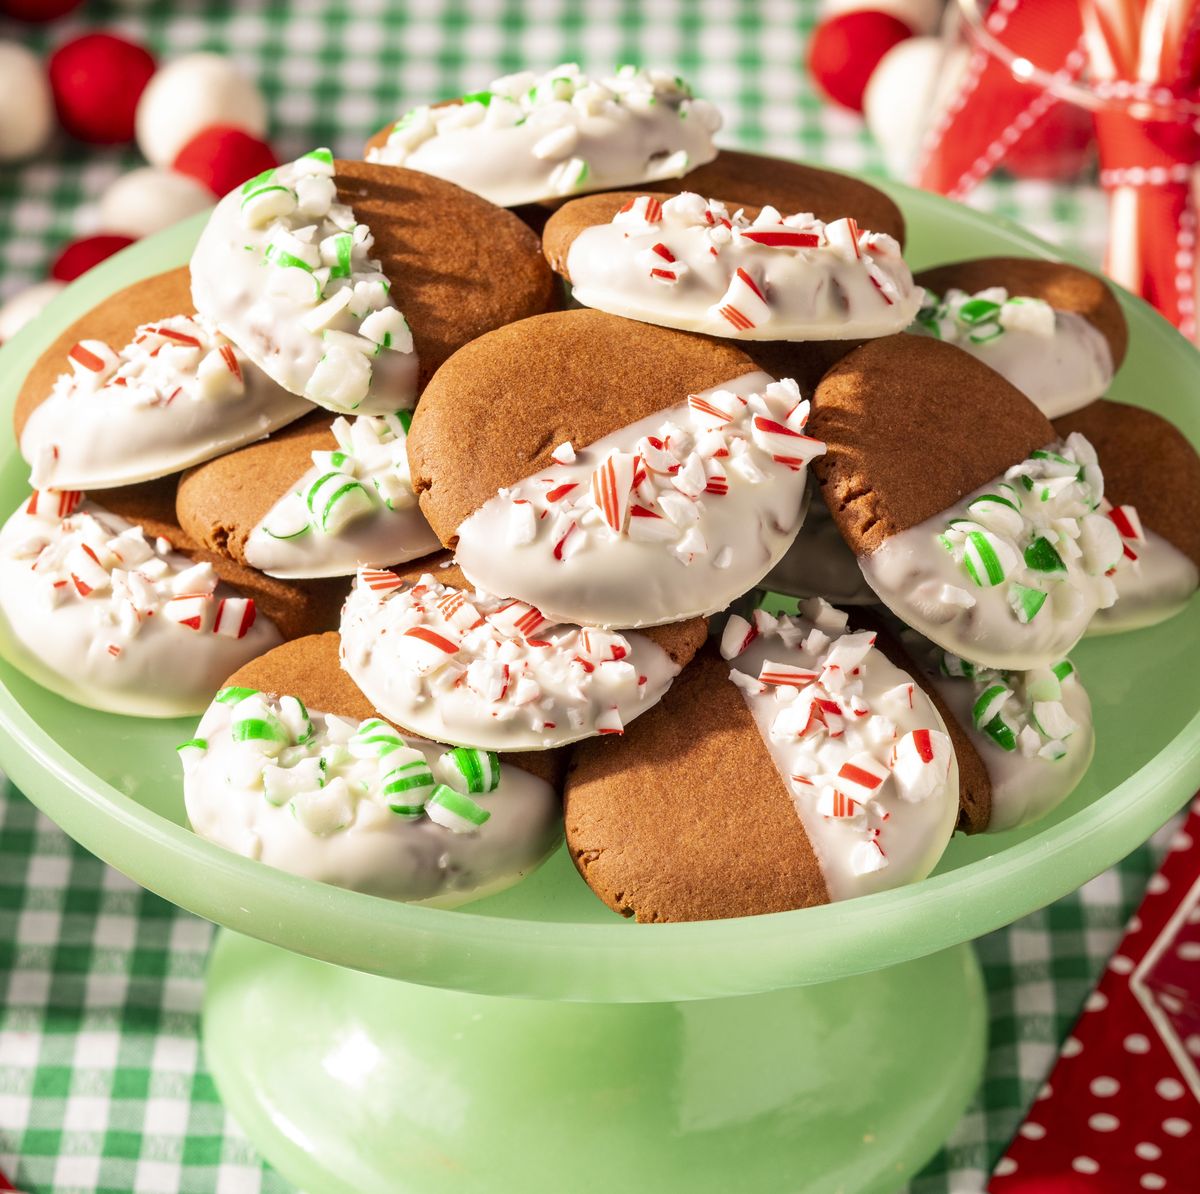 https://hips.hearstapps.com/hmg-prod/images/chocolate-candy-cane-cookies-recipe-1636735496.jpg?crop=0.670xw:1.00xh;0.175xw,0&resize=1200:*